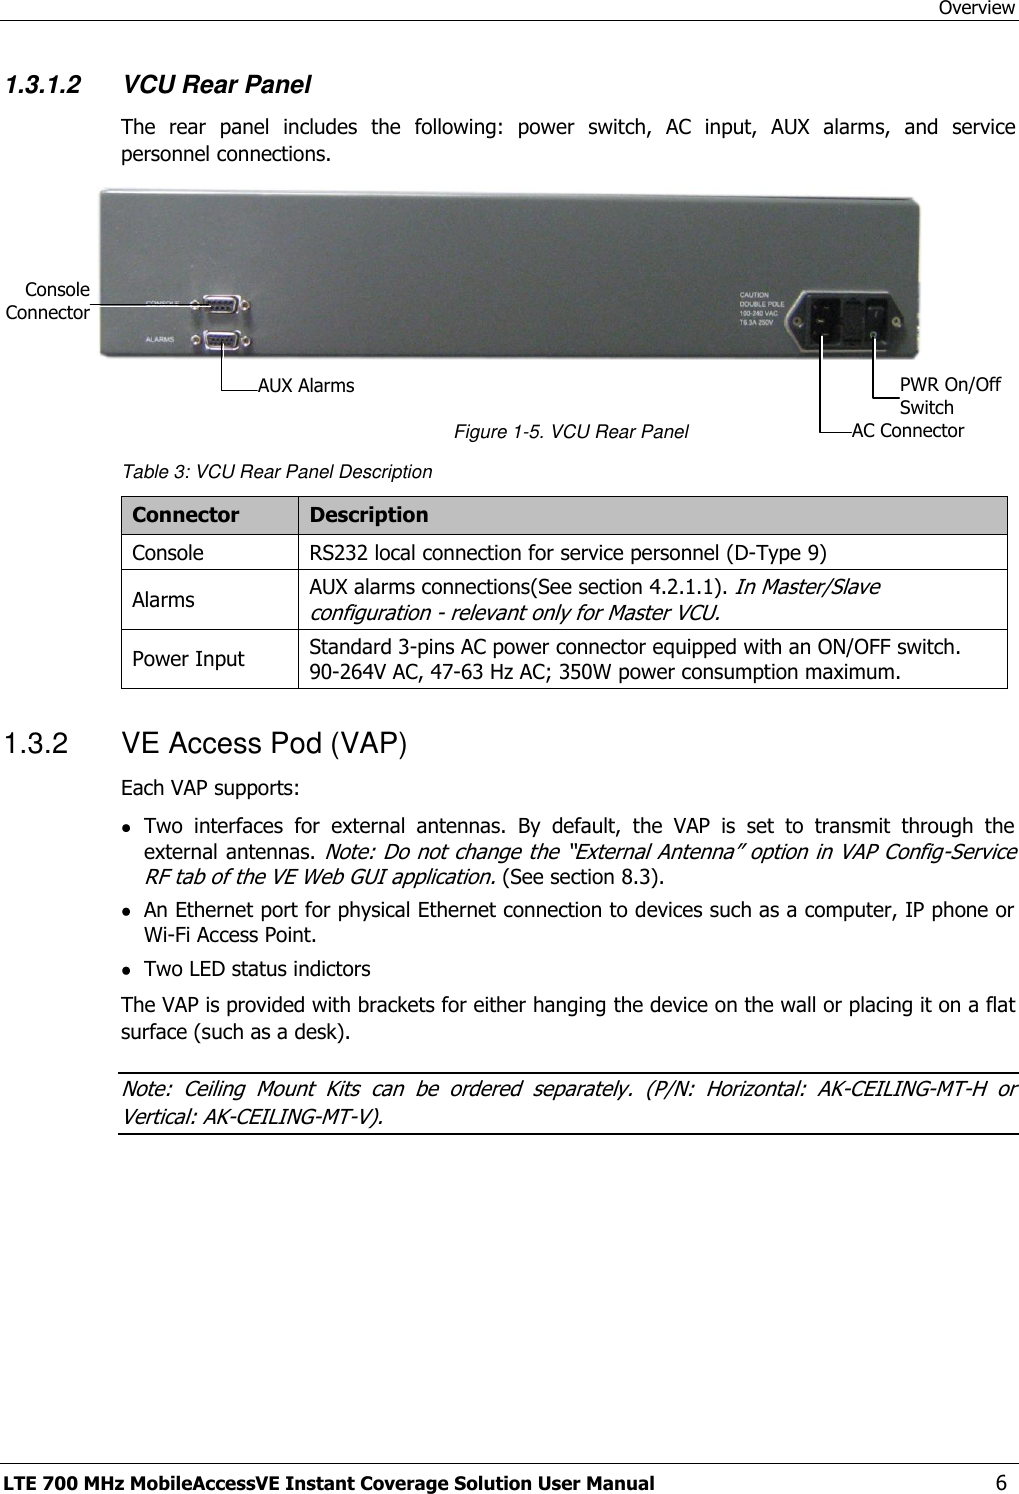 Overview LTE 700 MHz MobileAccessVE Instant Coverage Solution User Manual  6 1.3.1.2 VCU Rear Panel The  rear  panel  includes  the  following:  power  switch,  AC  input,  AUX  alarms,  and  service personnel connections.   Figure 1-5. VCU Rear Panel Table 3: VCU Rear Panel Description Connector Description Console RS232 local connection for service personnel (D-Type 9) Alarms AUX alarms connections(See section 4.2.1.1). In Master/Slave configuration - relevant only for Master VCU. Power Input Standard 3-pins AC power connector equipped with an ON/OFF switch. 90-264V AC, 47-63 Hz AC; 350W power consumption maximum. 1.3.2  VE Access Pod (VAP) Each VAP supports:  Two  interfaces  for  external  antennas.  By  default,  the  VAP  is  set  to  transmit  through  the external antennas. Note: Do not change the “External Antenna” option in VAP Config-Service RF tab of the VE Web GUI application. (See section 8.3).  An Ethernet port for physical Ethernet connection to devices such as a computer, IP phone or Wi-Fi Access Point.  Two LED status indictors The VAP is provided with brackets for either hanging the device on the wall or placing it on a flat surface (such as a desk).  Note:  Ceiling  Mount  Kits  can  be  ordered  separately.  (P/N:  Horizontal:  AK-CEILING-MT-H  or Vertical: AK-CEILING-MT-V). PWR On/Off Switch AC Connector AUX Alarms Console Connector 